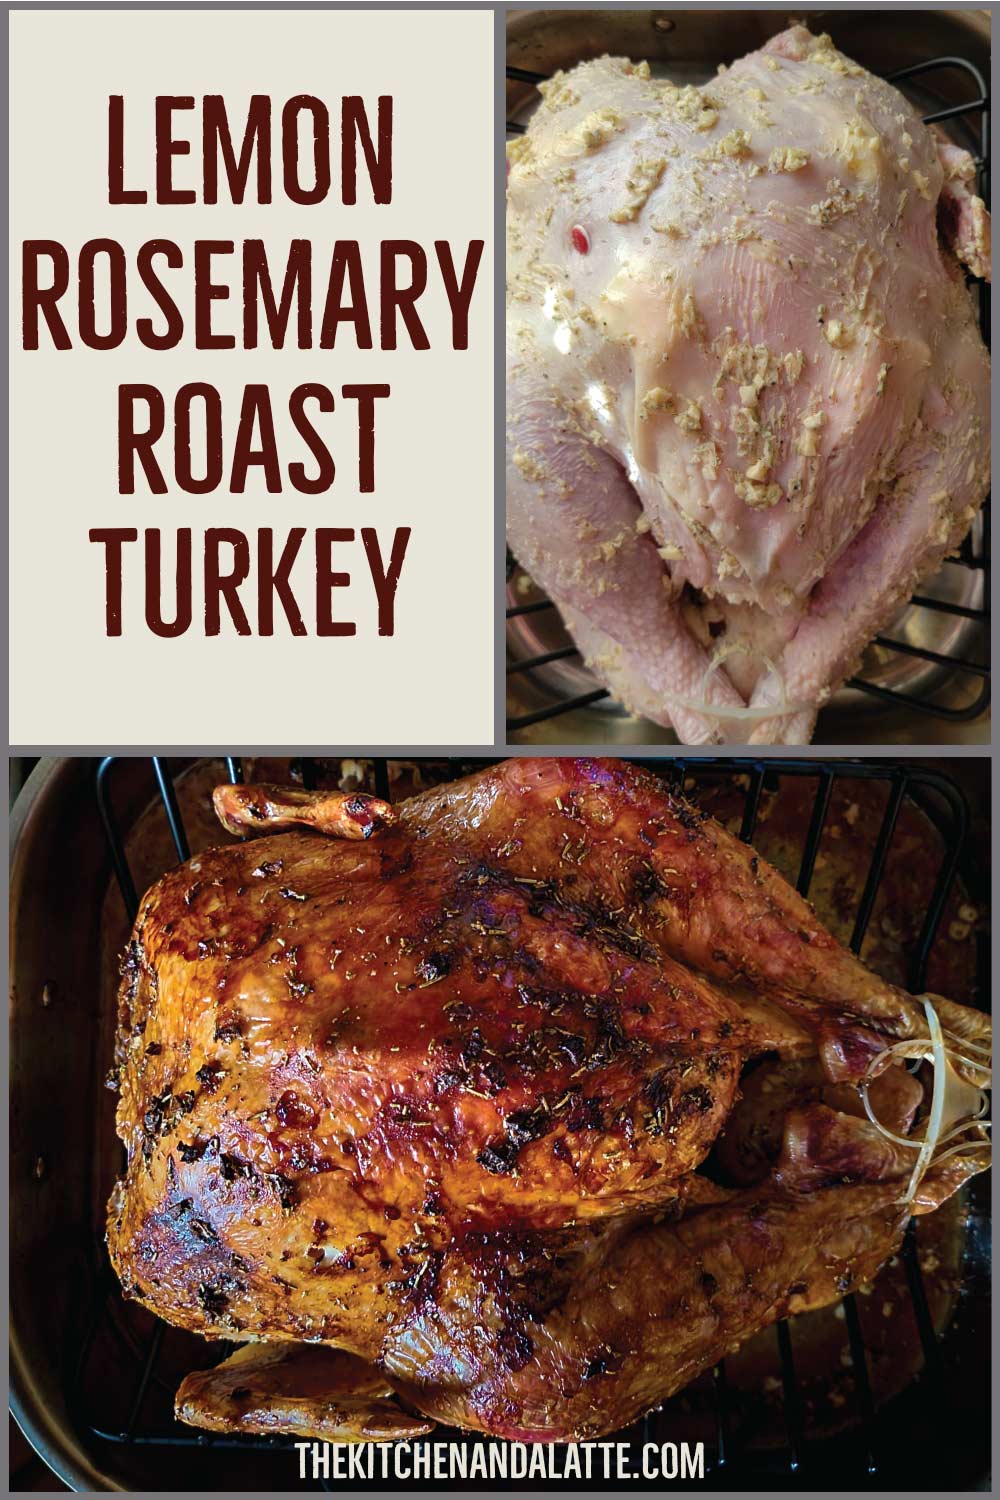 Lemon rosemary turkey Pinterest graphic. Turkey covered in seasonings prepped for baking and the turkey after baking with a nicely browned skin.